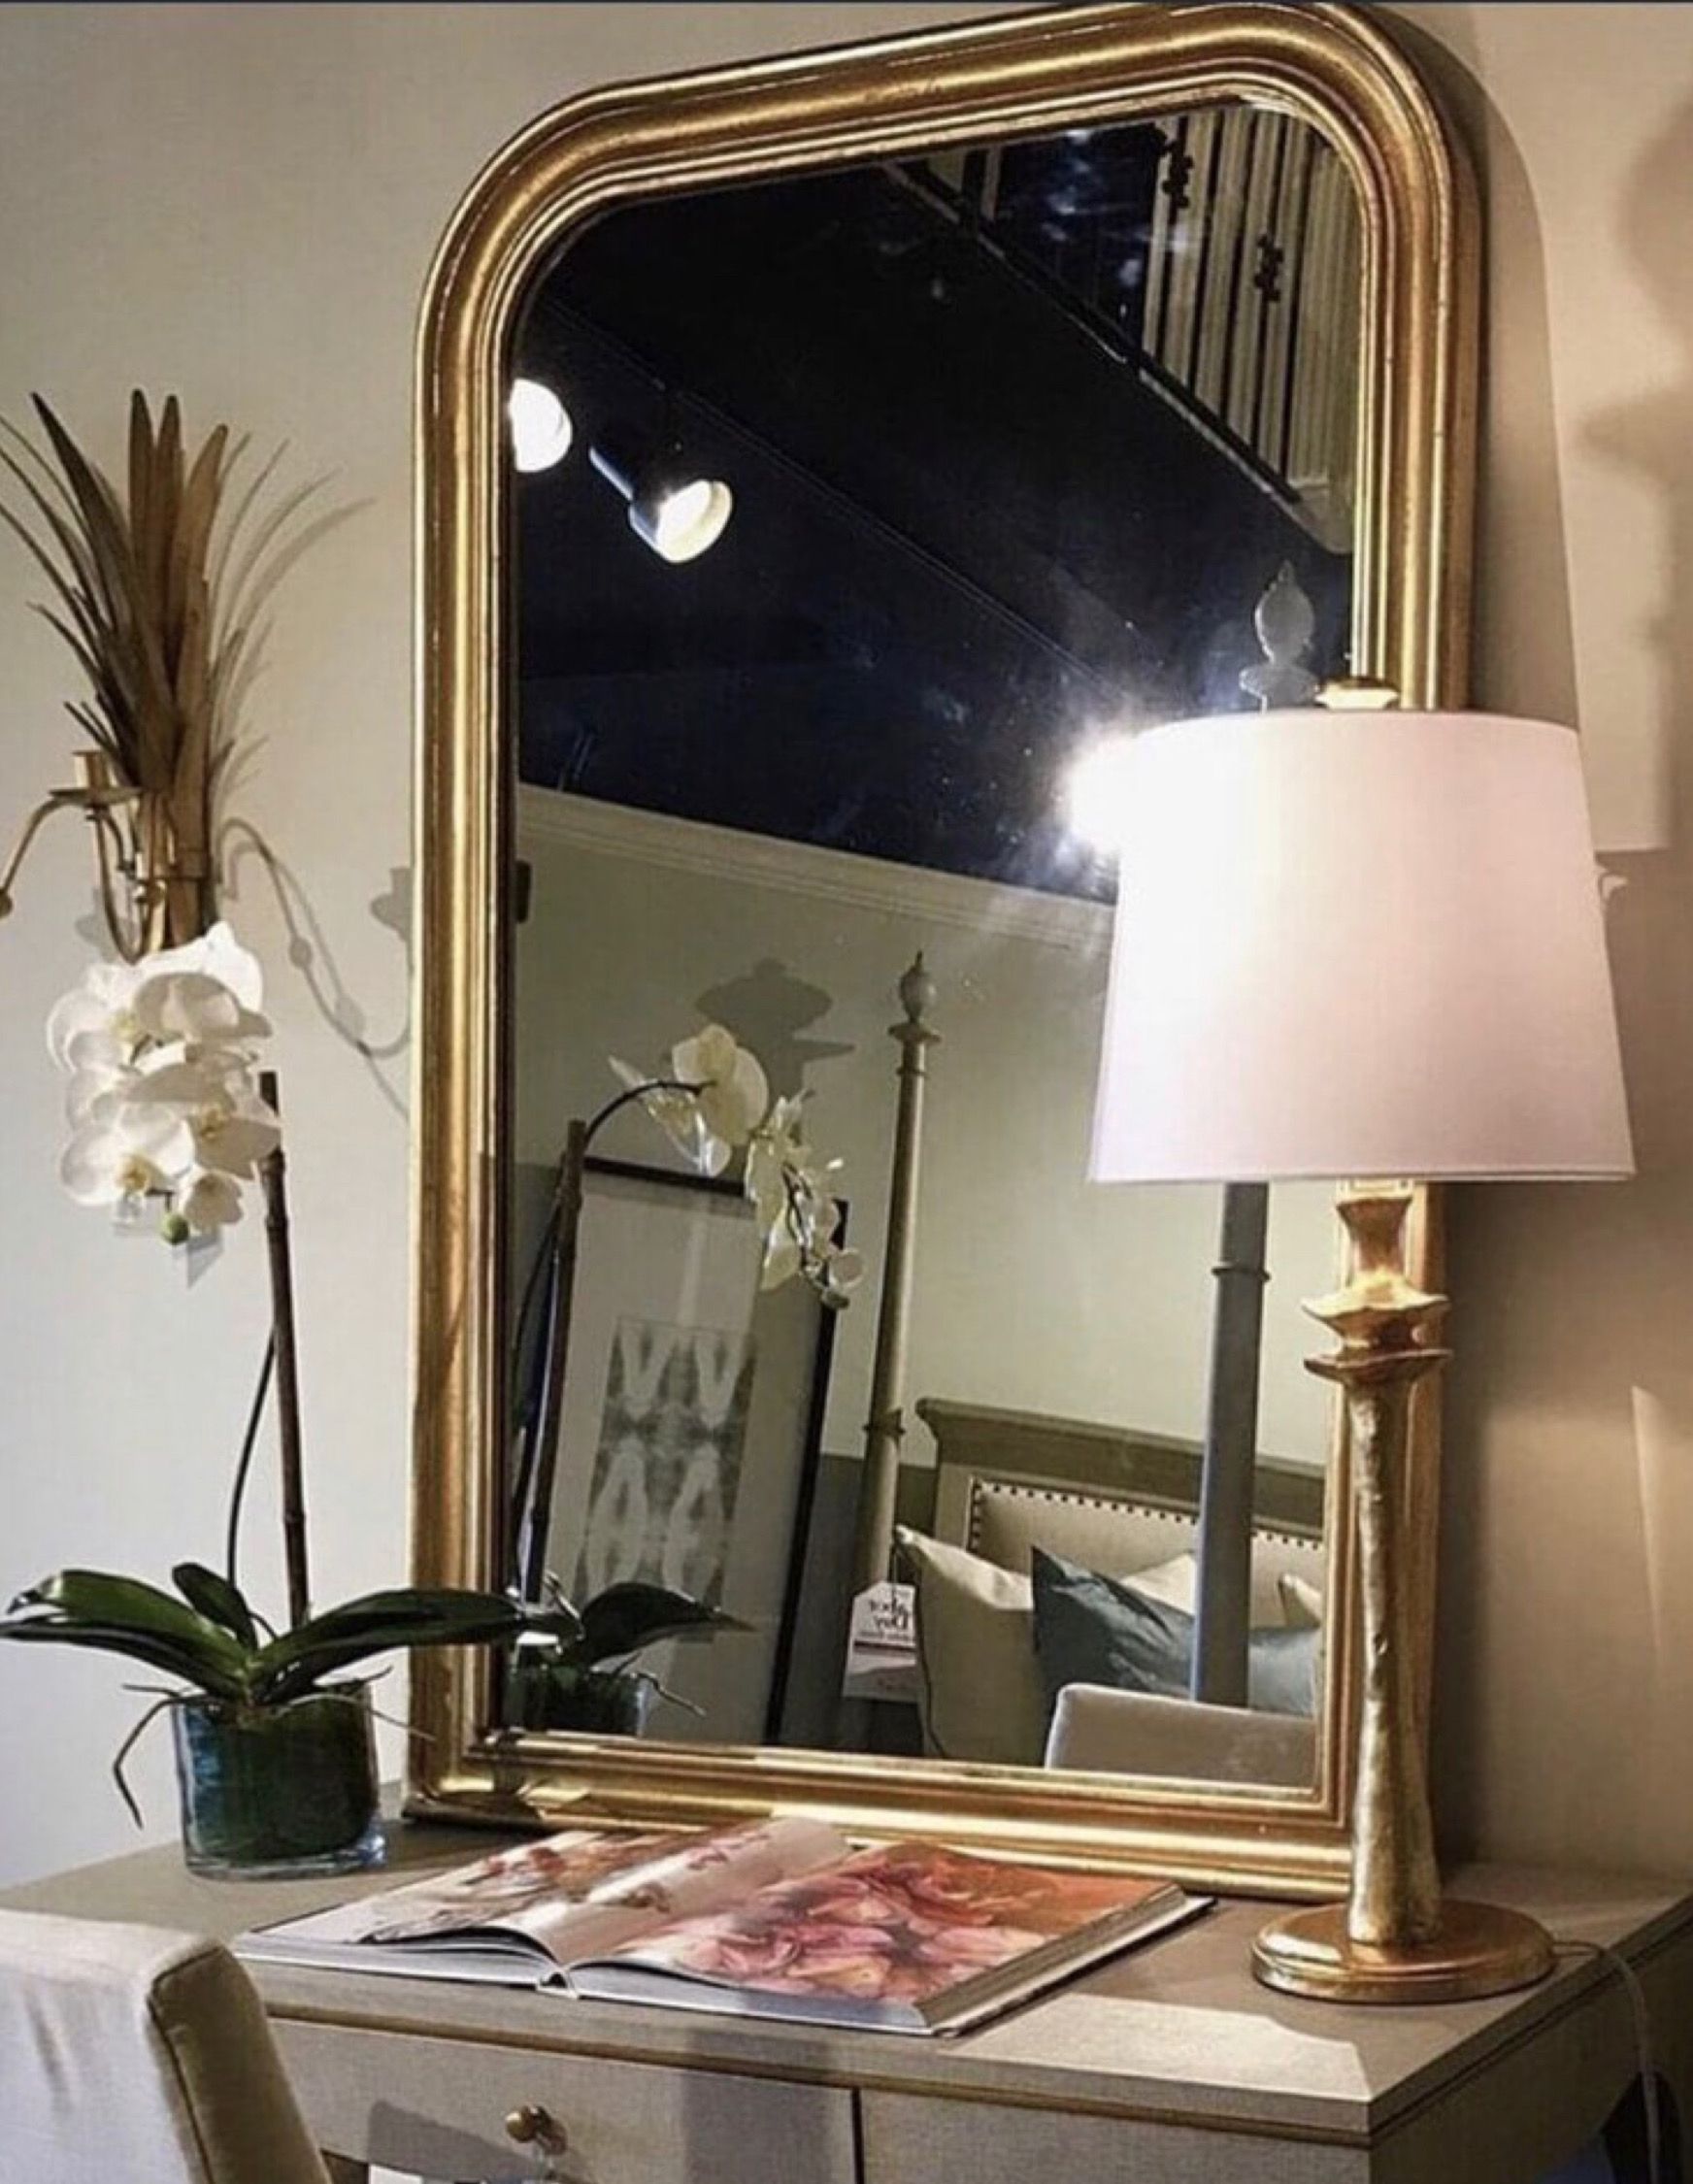 Pinjoy Rauls On Master Bedroom | Mirror, Wood Mirror, Gold Leaf Inside Farmhouse Woodgrain And Leaf Accent Wall Mirrors (View 3 of 15)